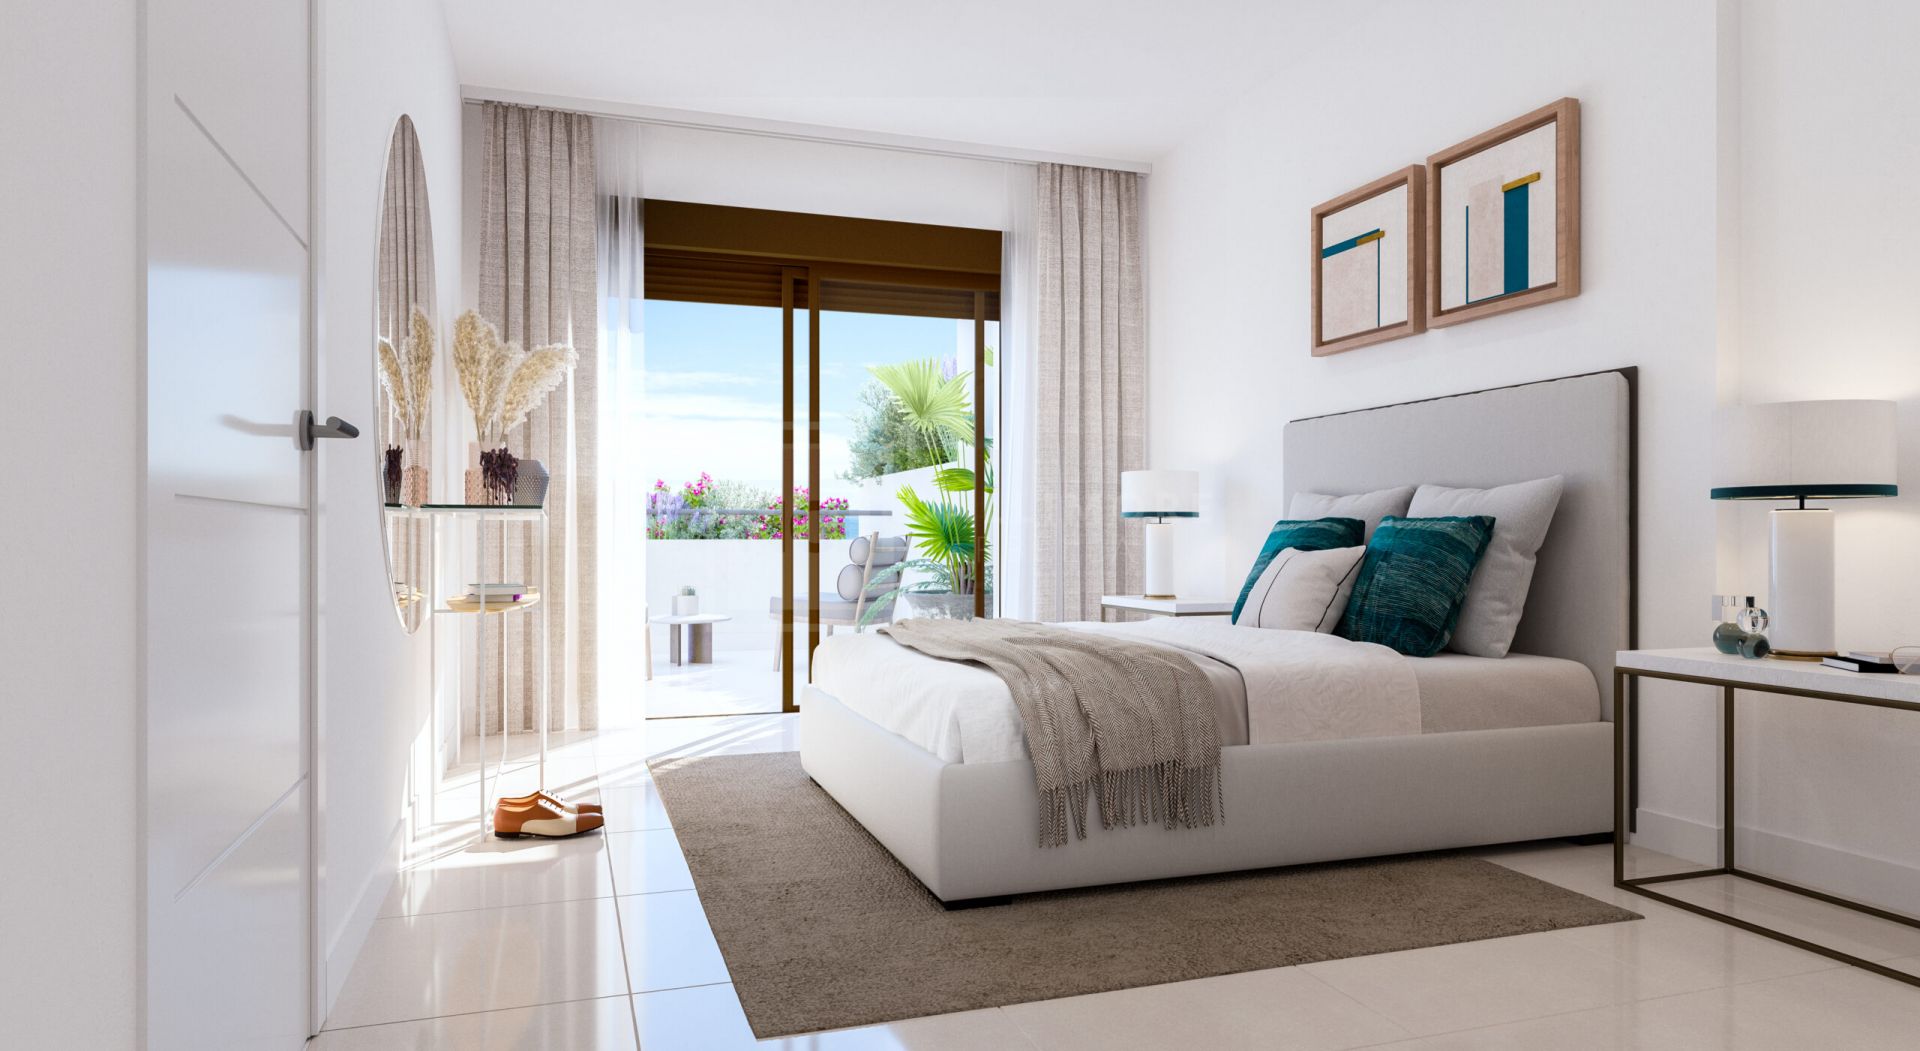 ABY ESTEPONA - MODERN APARTMENTS AND PENTHOUSES FOR SALE IN ESTEPONA